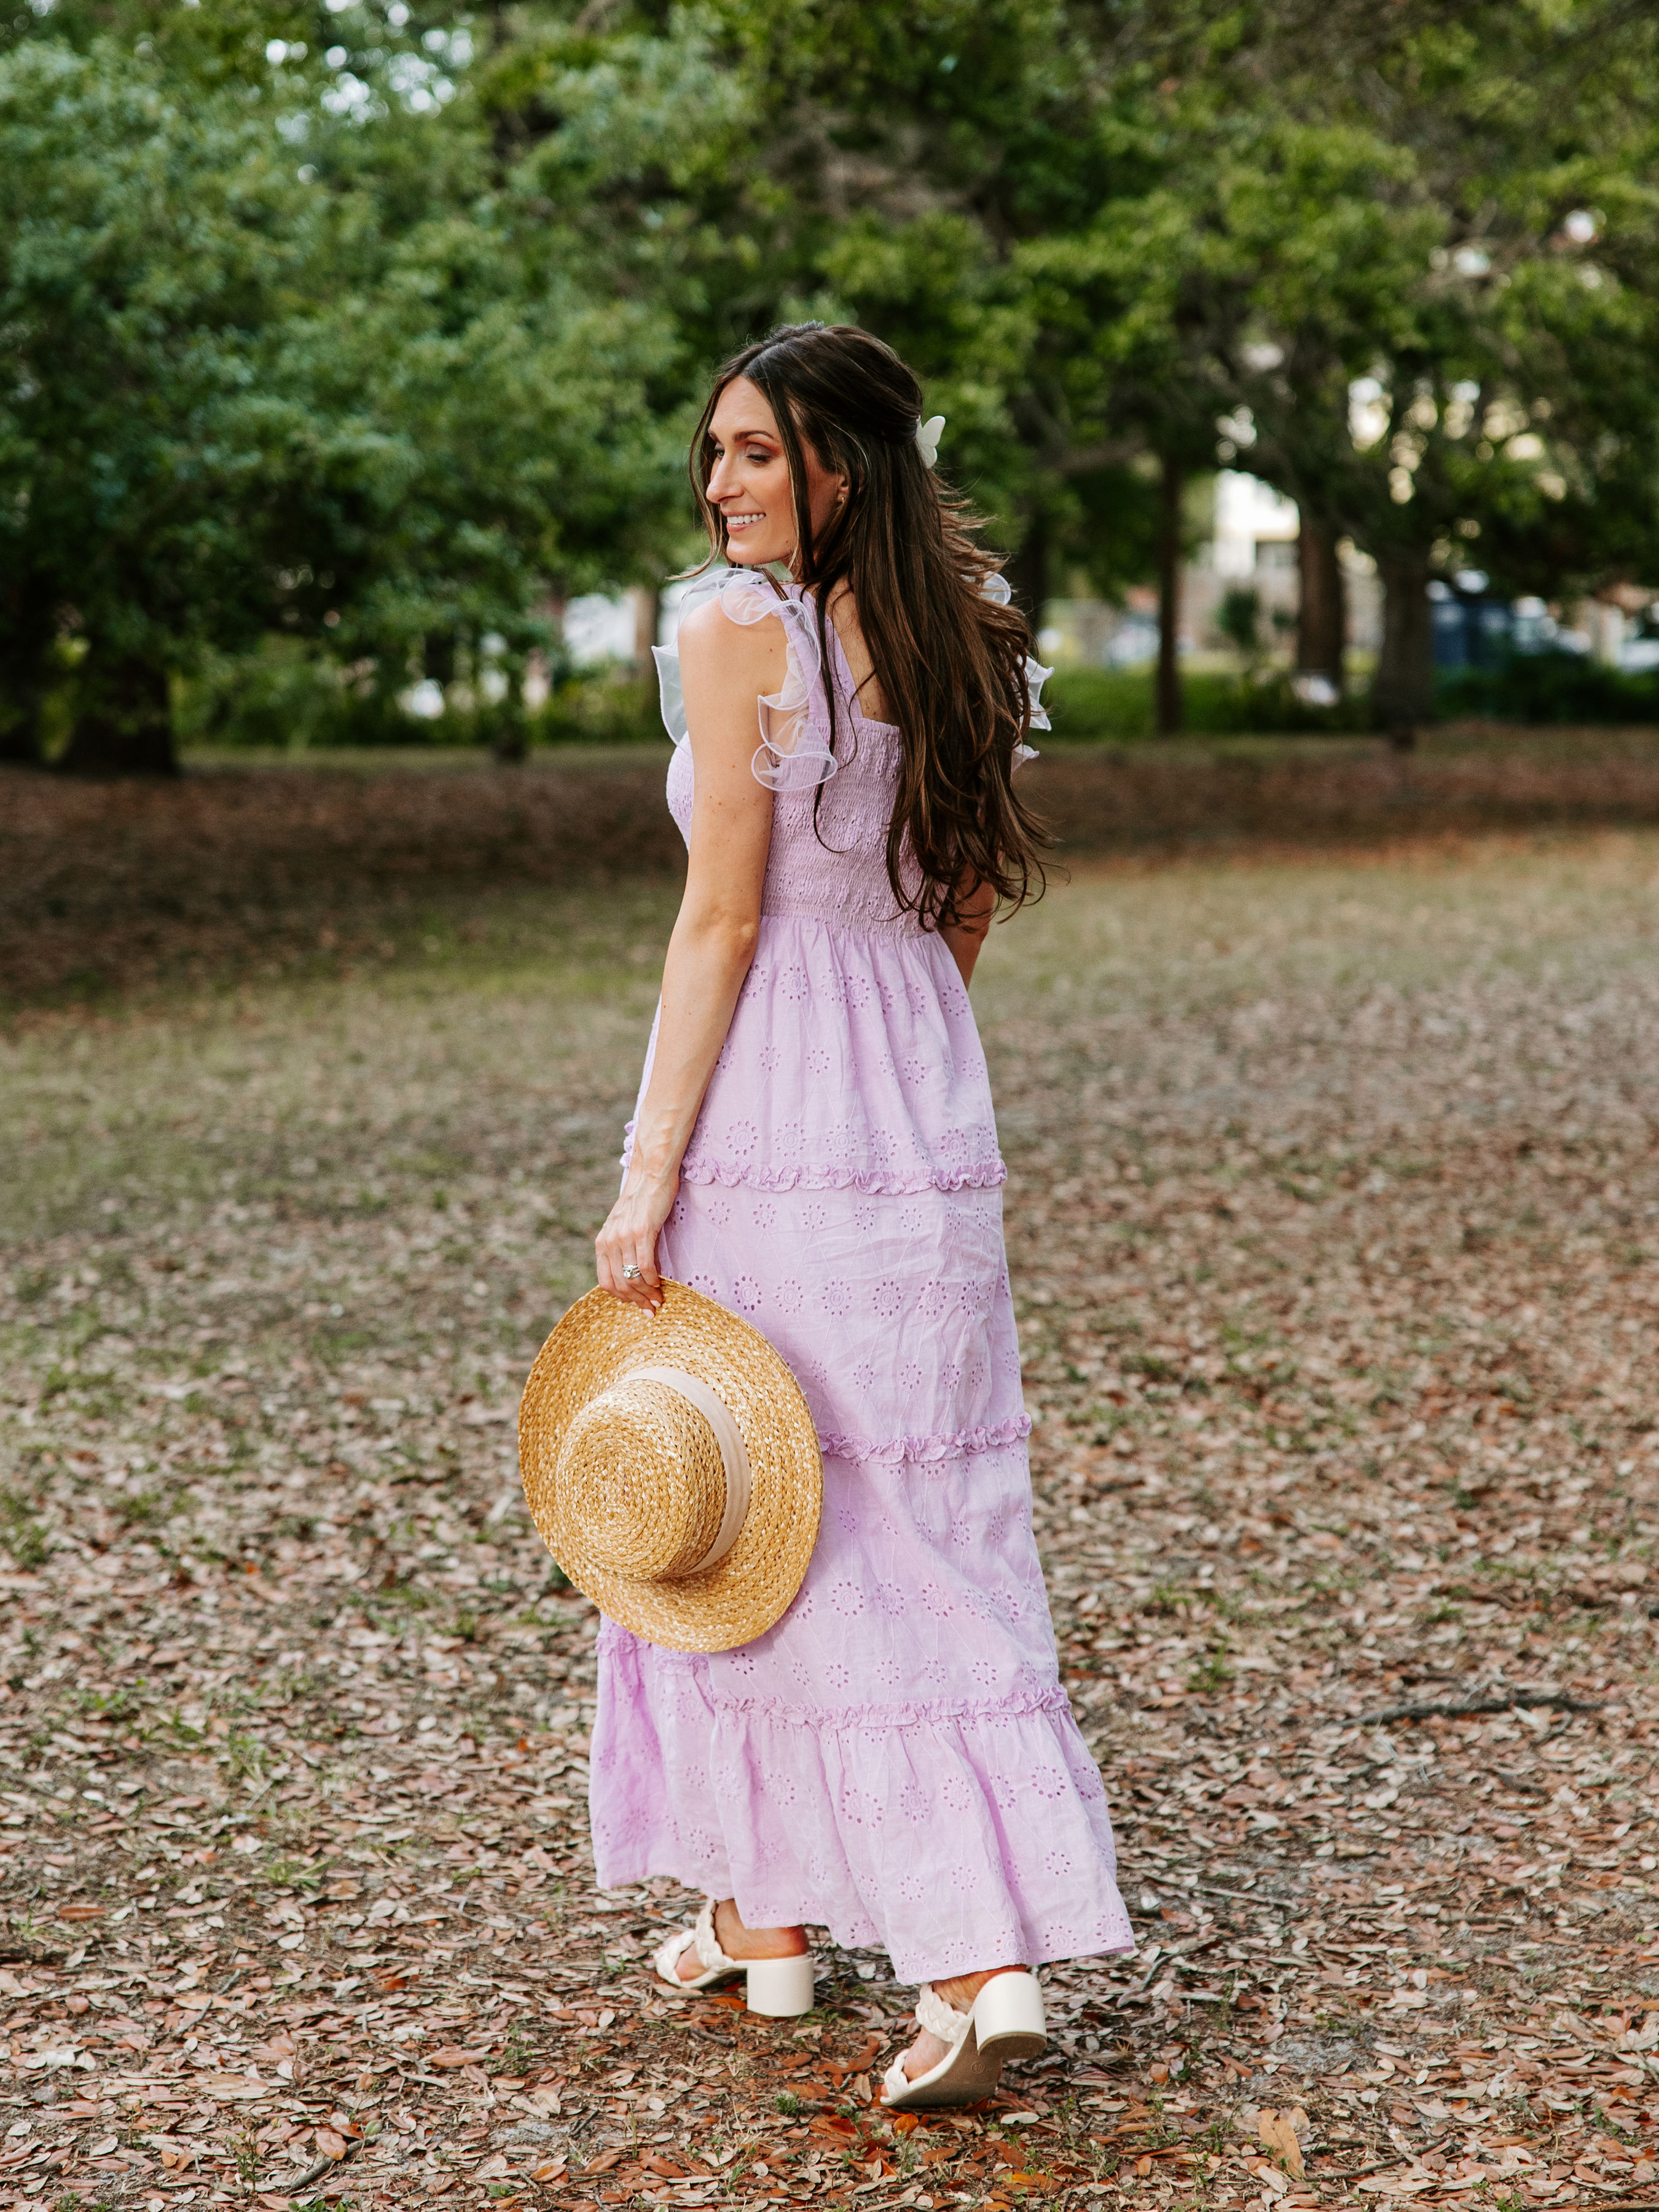 Label Rail x CheapChicFinds Women's Tiered Broderie Maxi Dress - image 1 of 7